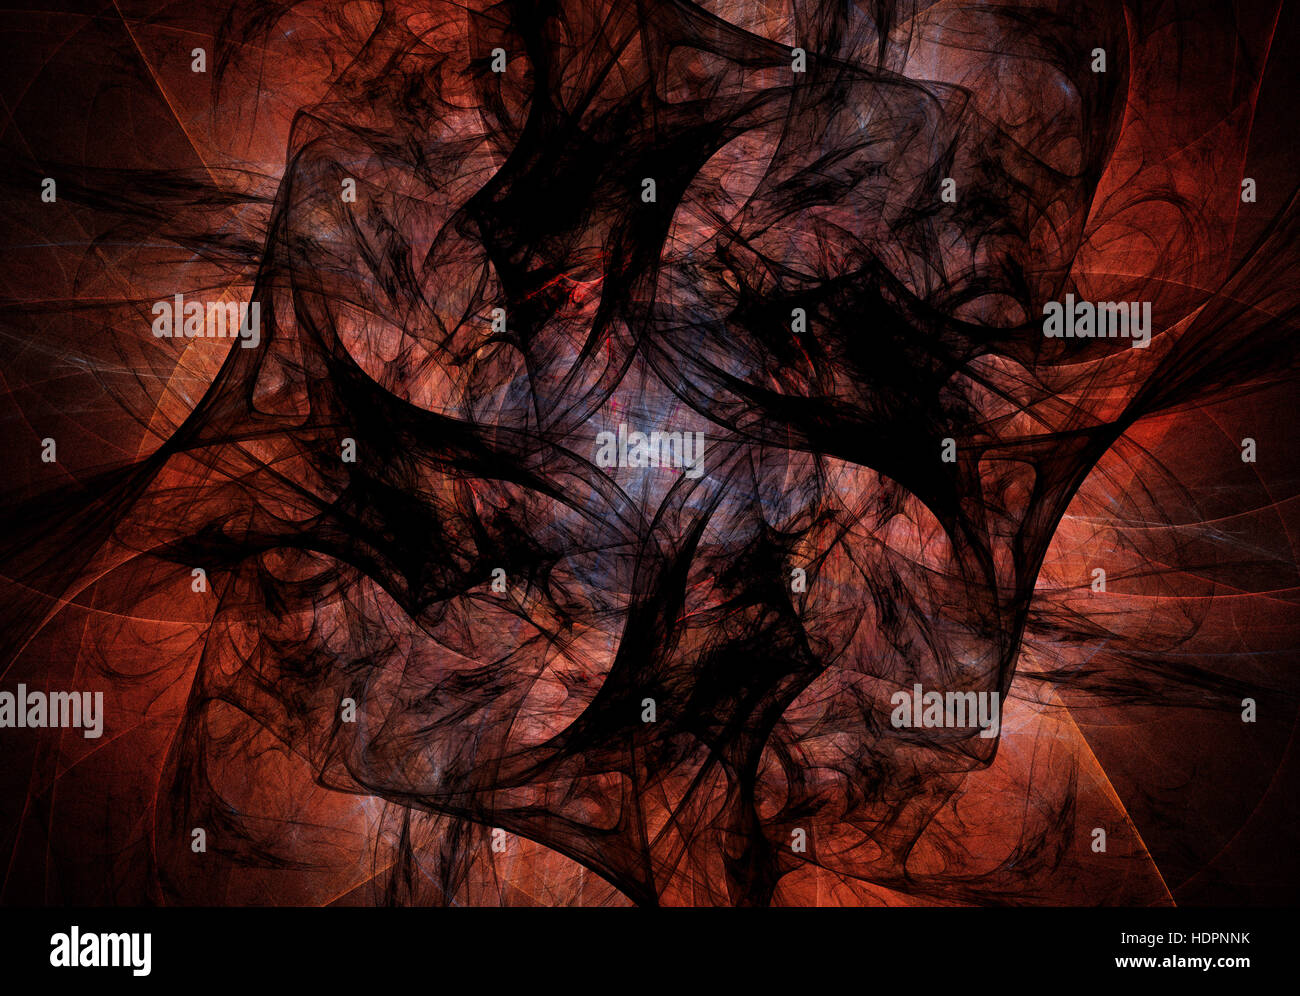 Abstract fractal shapes on black background. Stock Photo